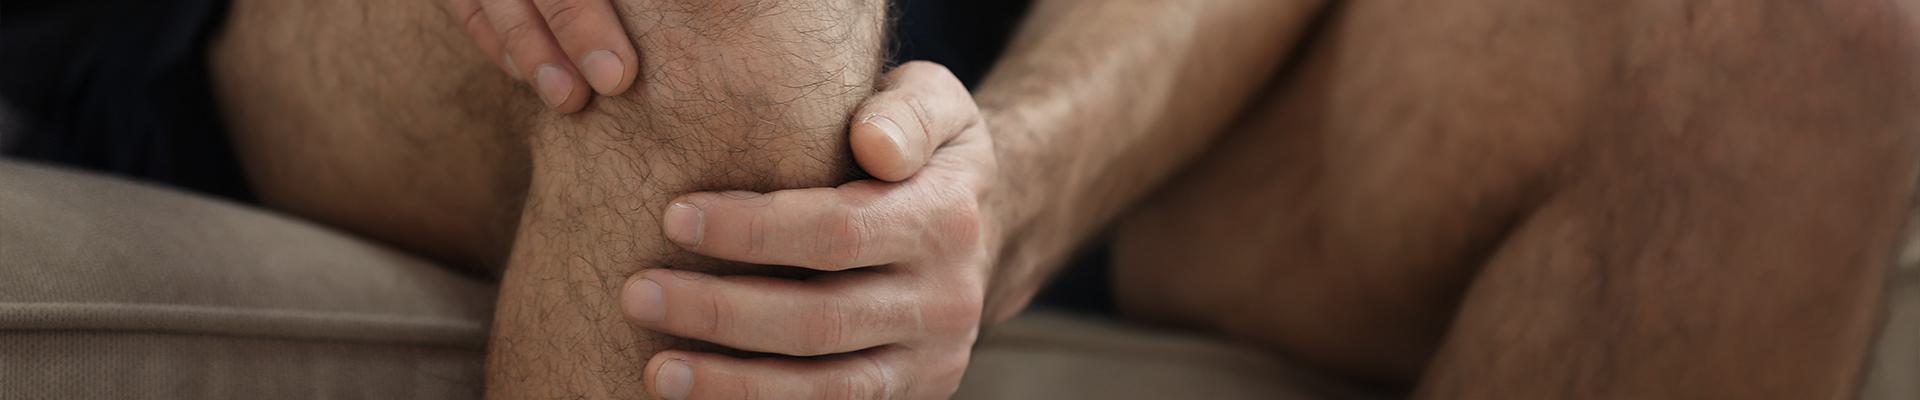 closeup of man holding knee in pain